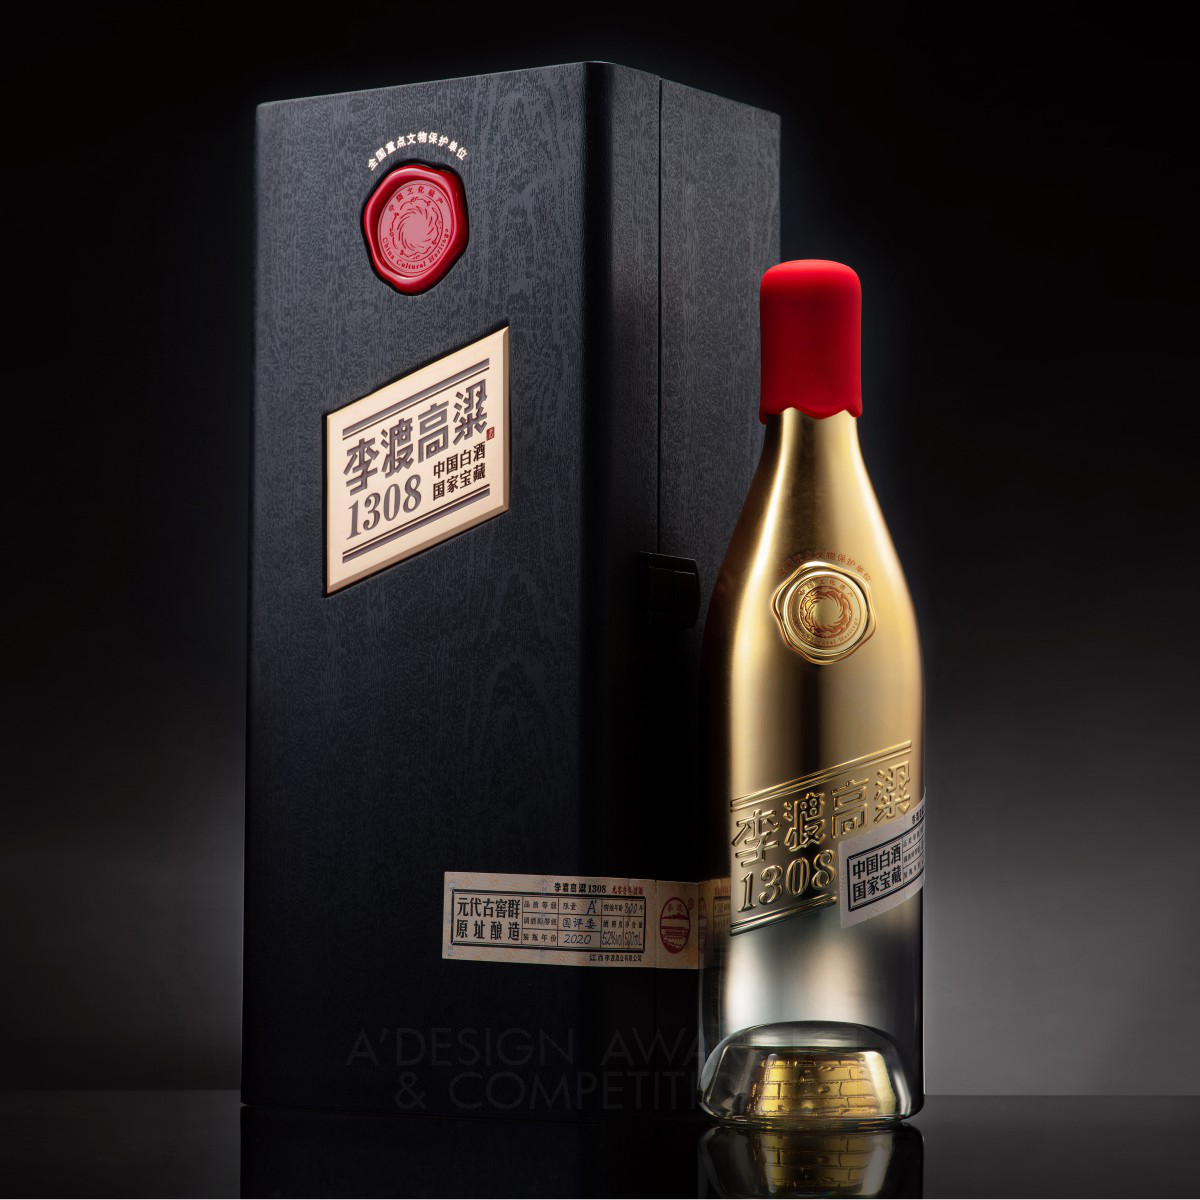 Wen Liu wins Golden at the prestigious A' Packaging Design Award with Lidu Sorghum 1308 Alcoholic Beverage Packaging.